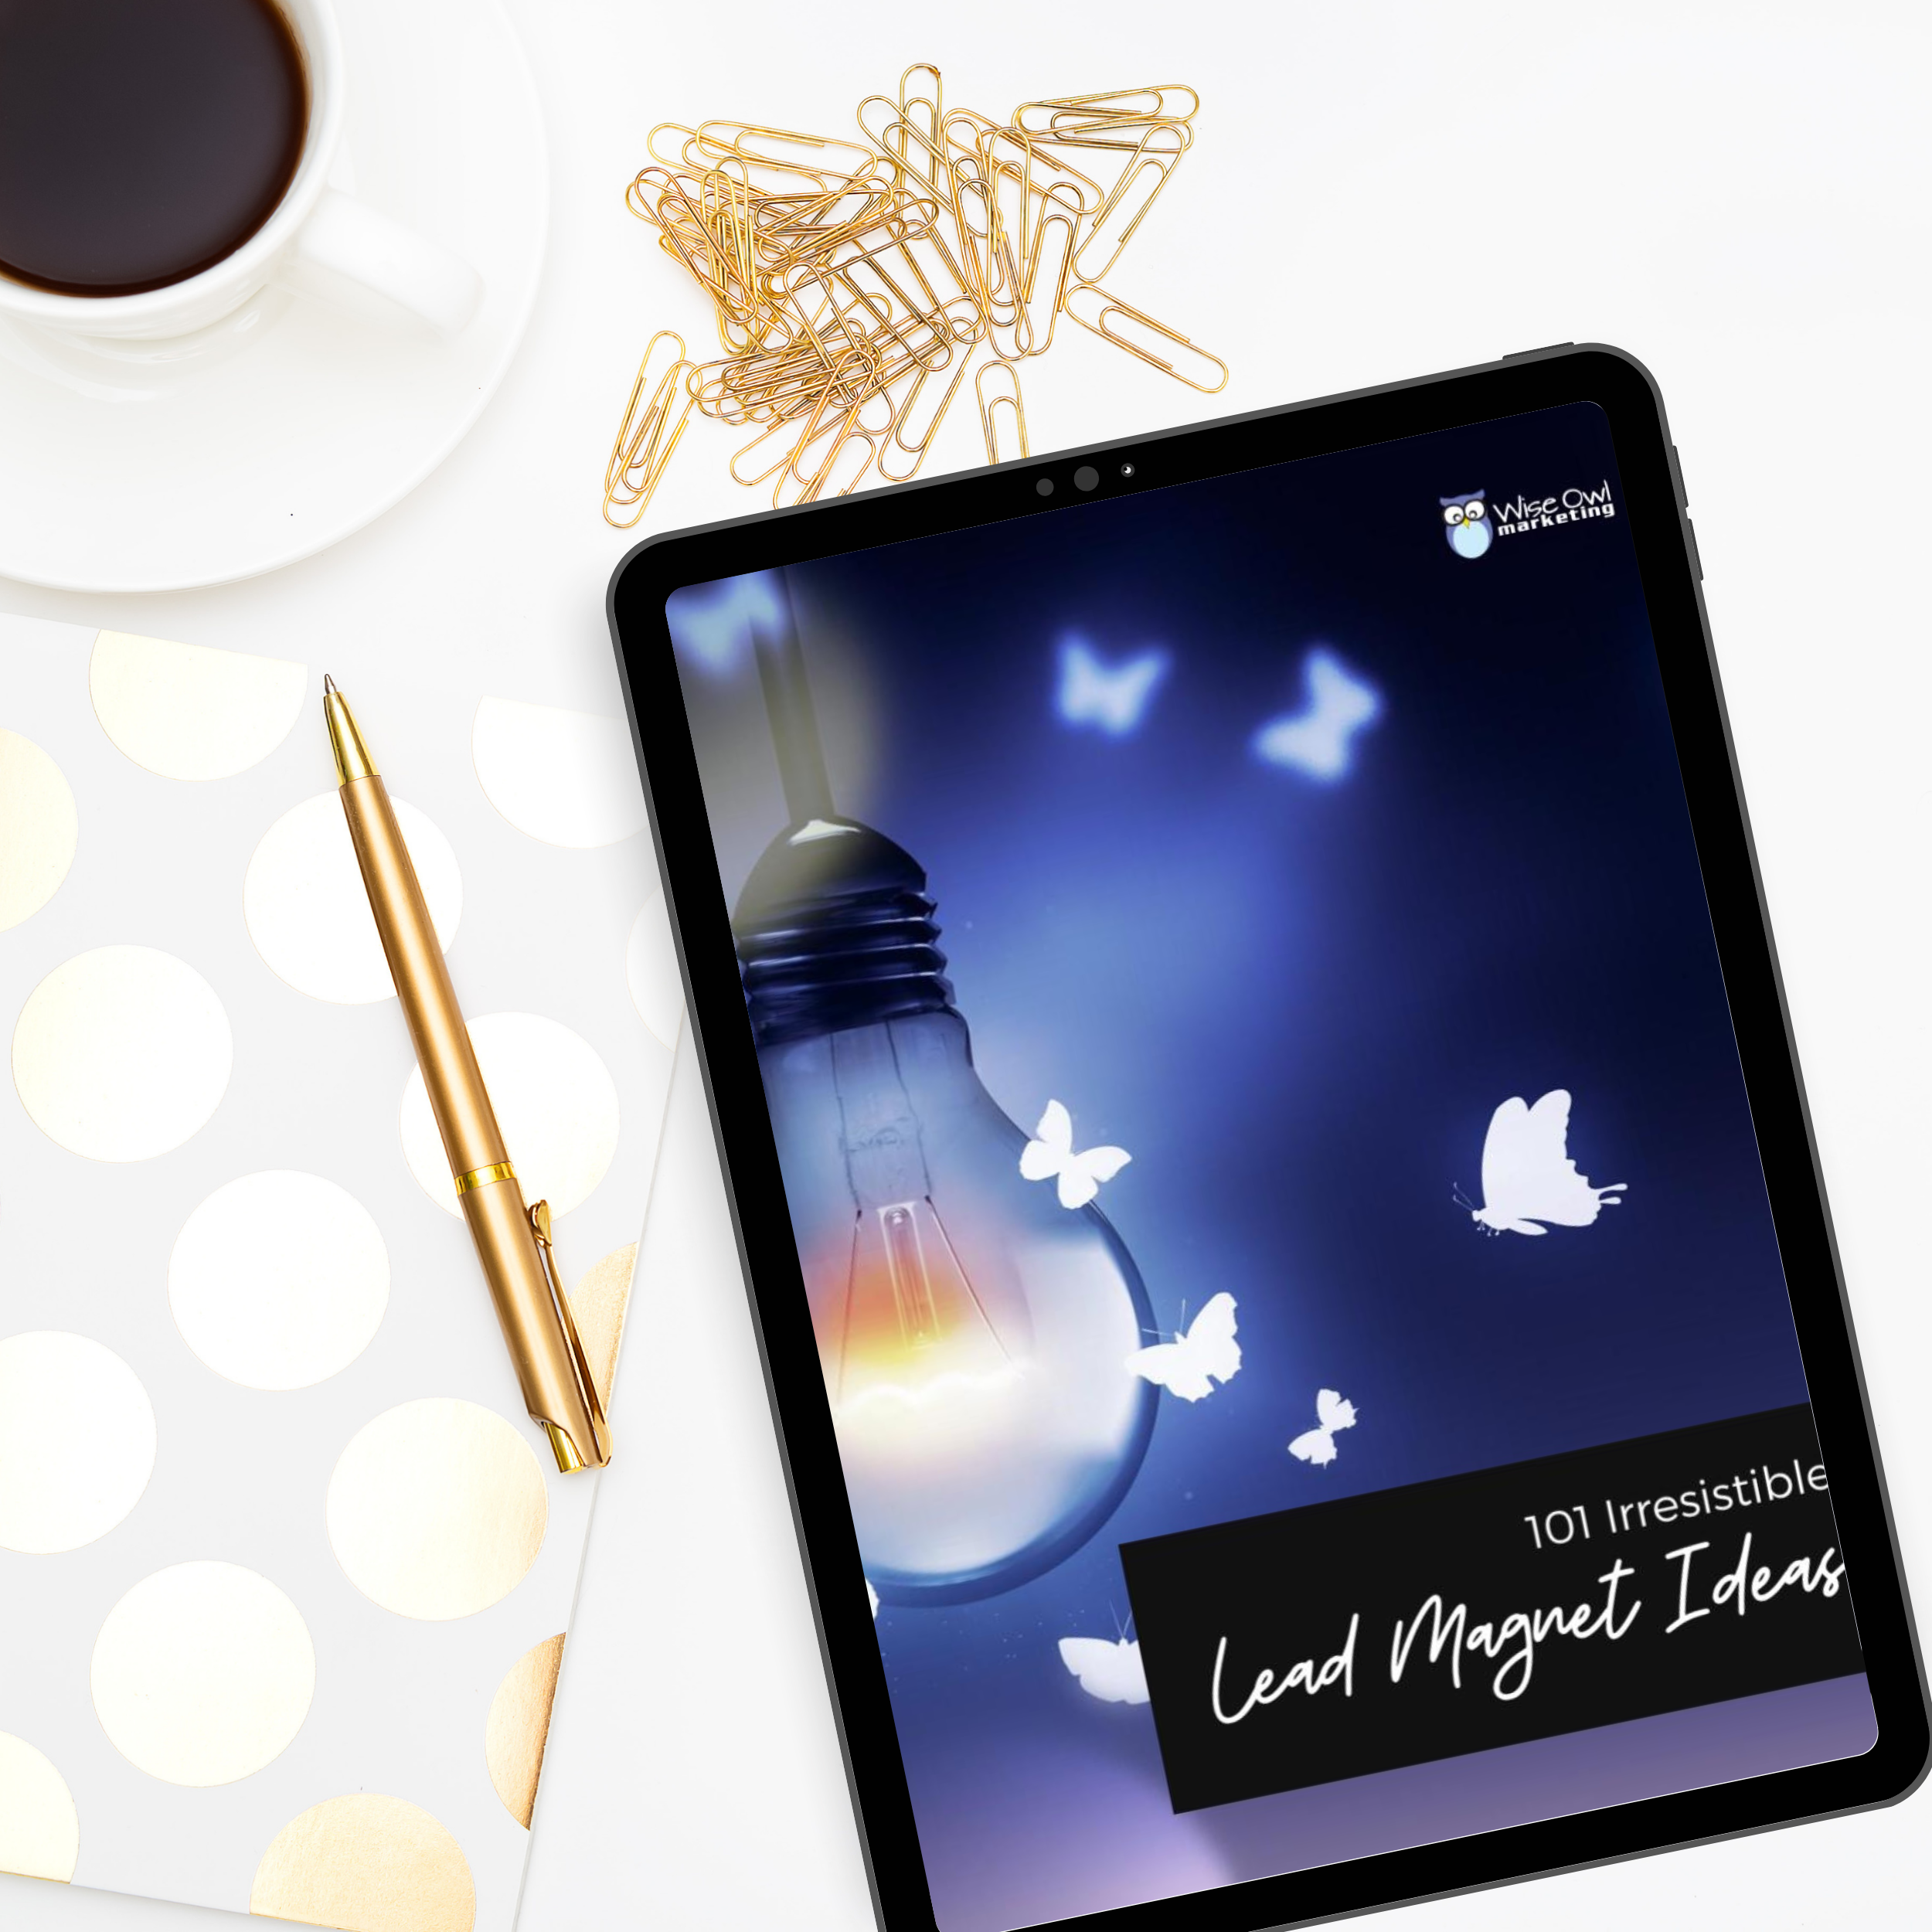 desk with gold accessories and an ipad mockup showing the cover of 101 lead magnet ideas with a light bulb attracting butterflies